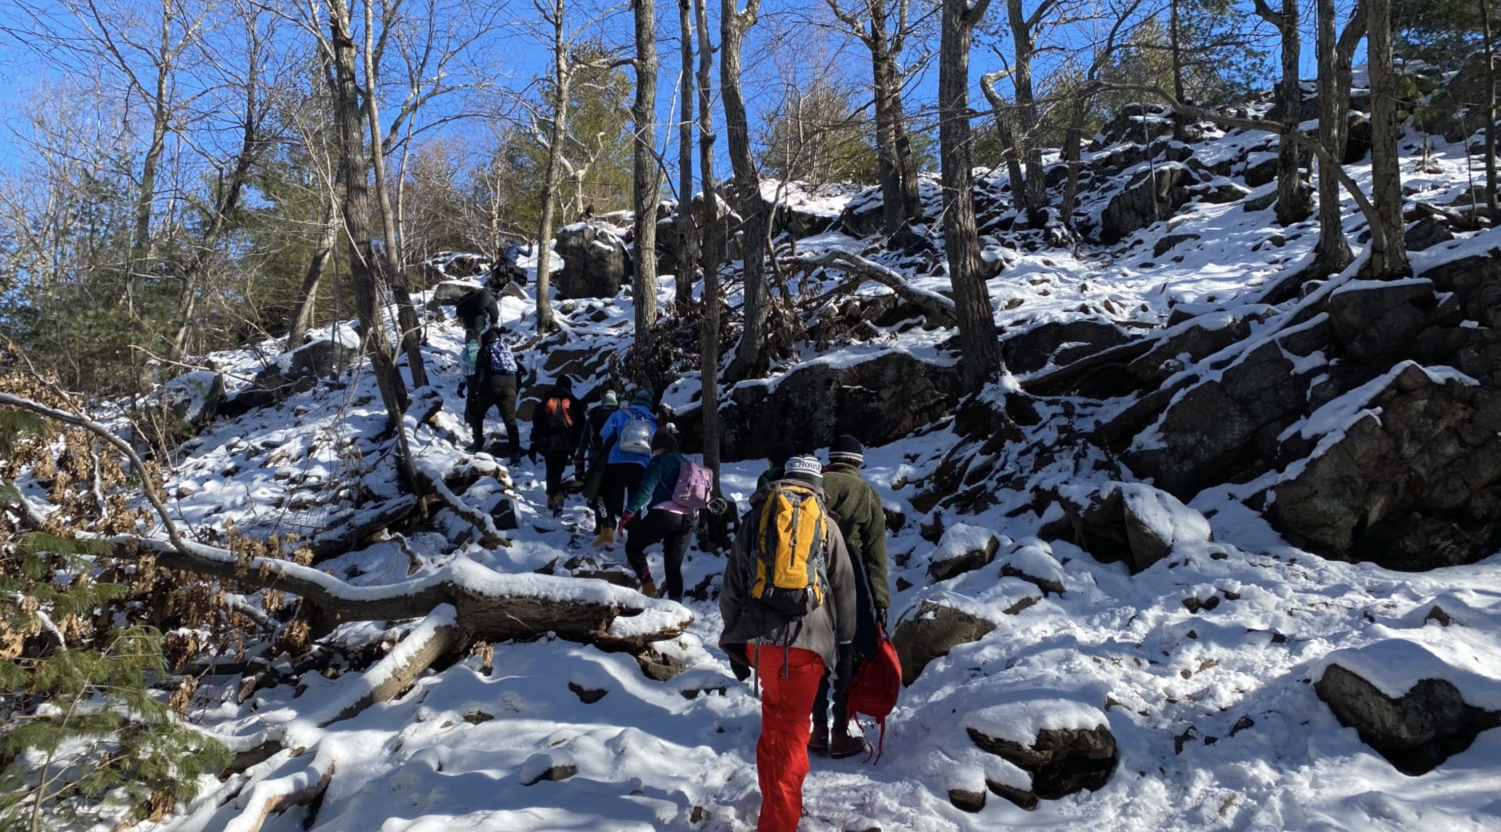 Upper School students engage on a 6-mile hike at Blue Hills.